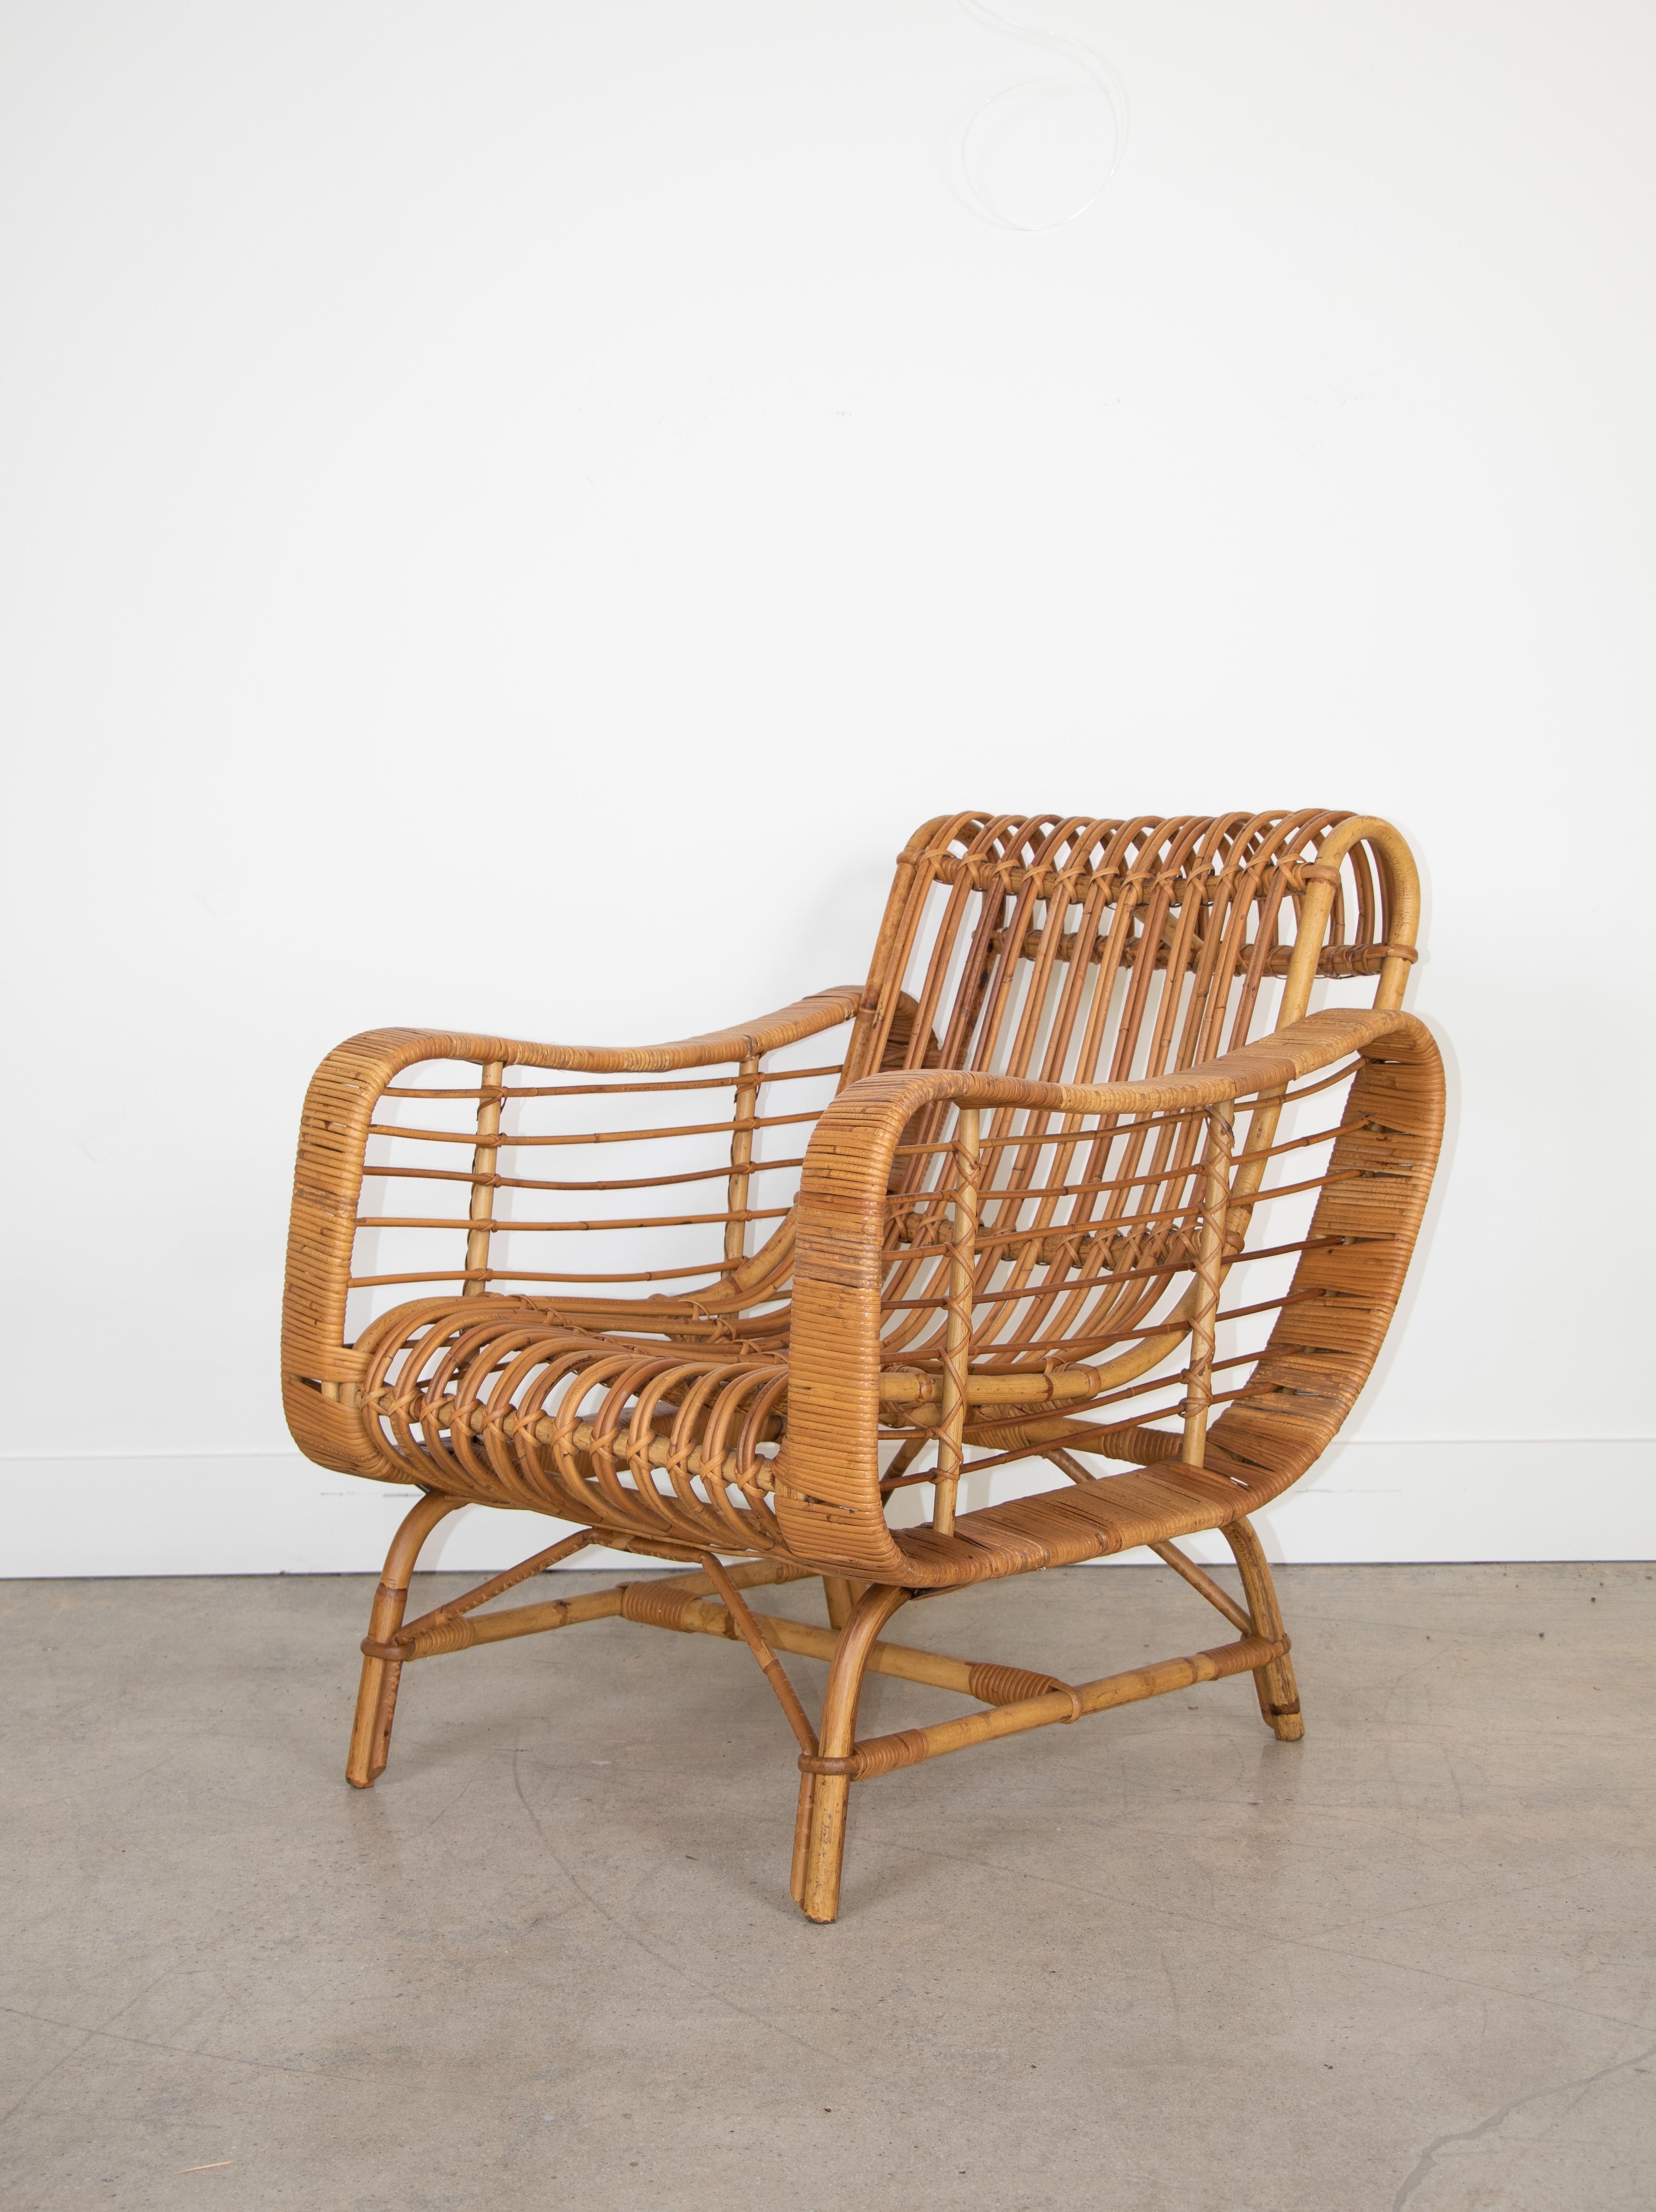 Italian rattan lounge chair with sculptural form and unique detail. Reclined curved back and fully wrapped armrests. Stunning piece.